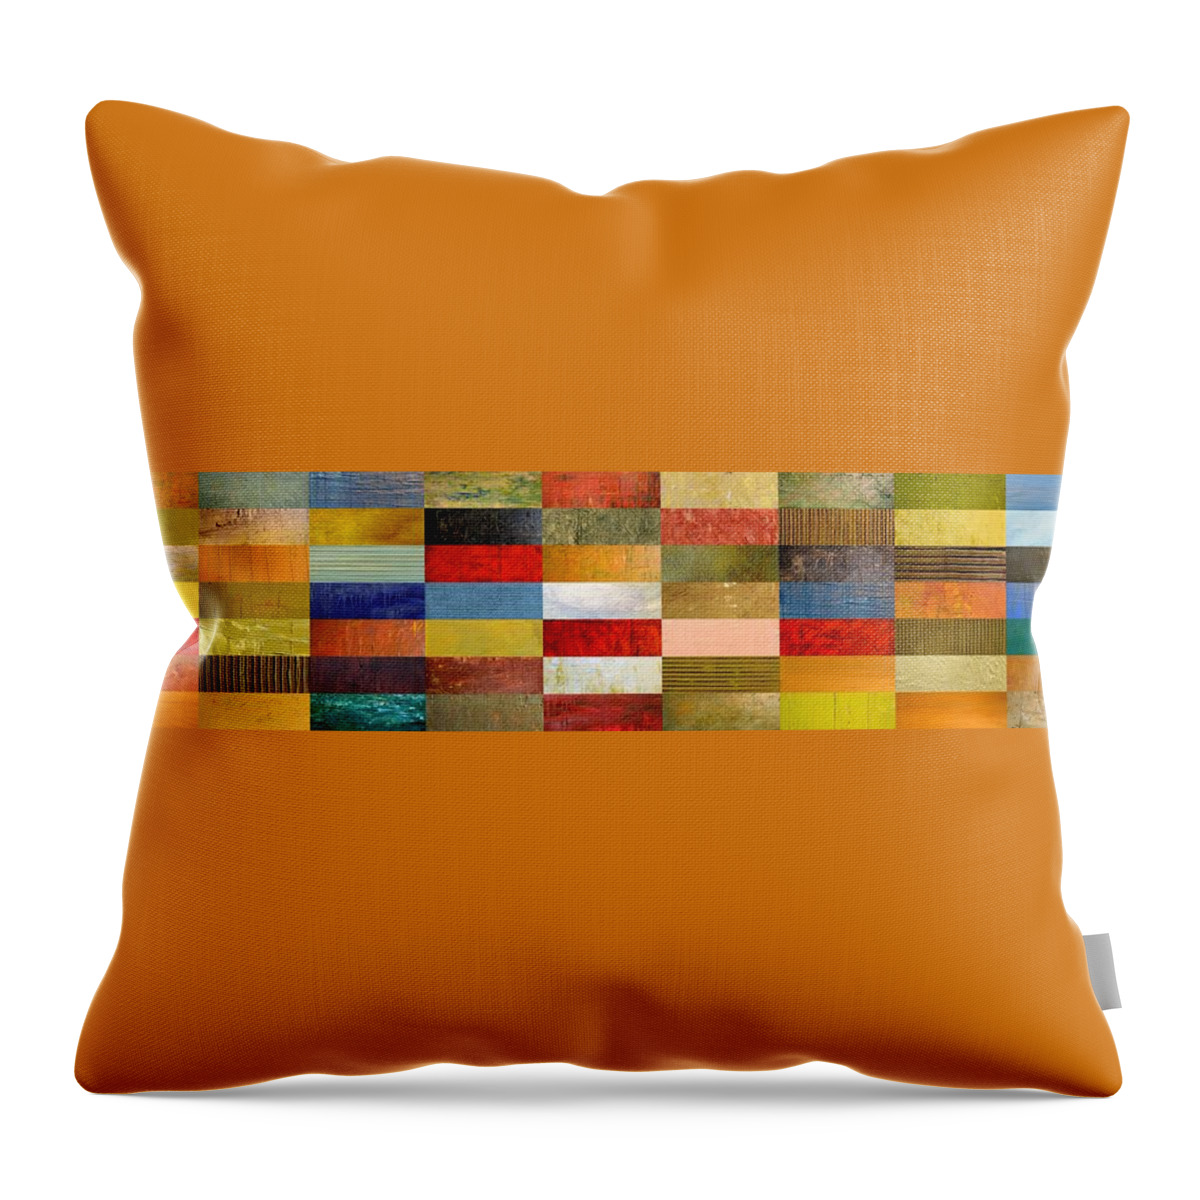 Textural Throw Pillow featuring the digital art Eye Candy by Michelle Calkins